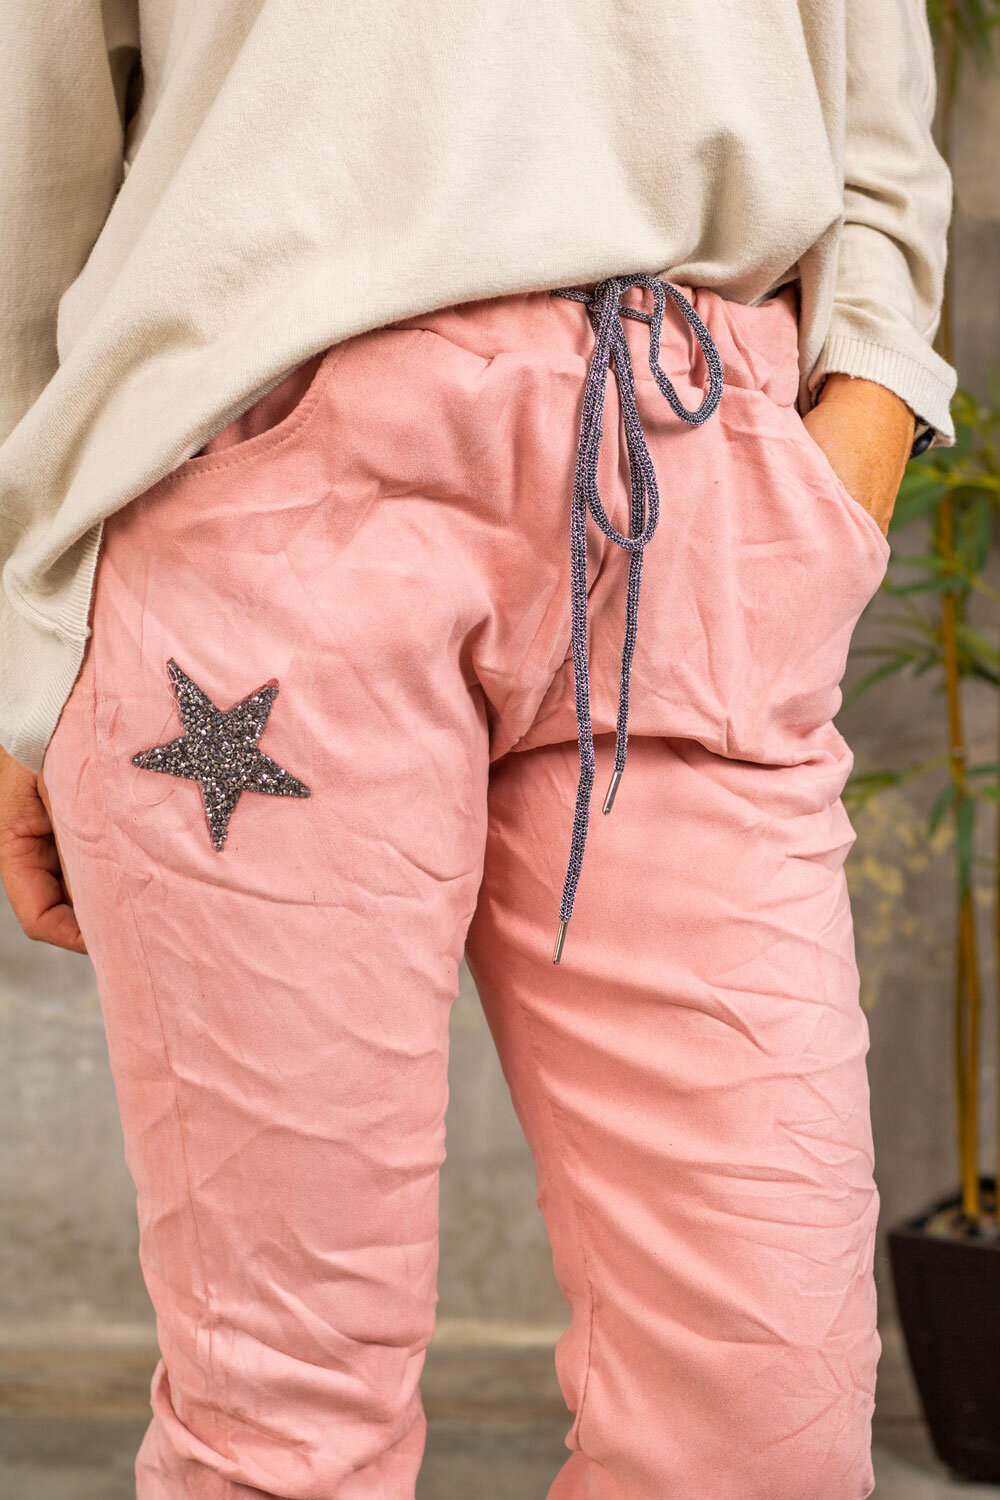 Stretchy pants 7164 - Bling star - Pink